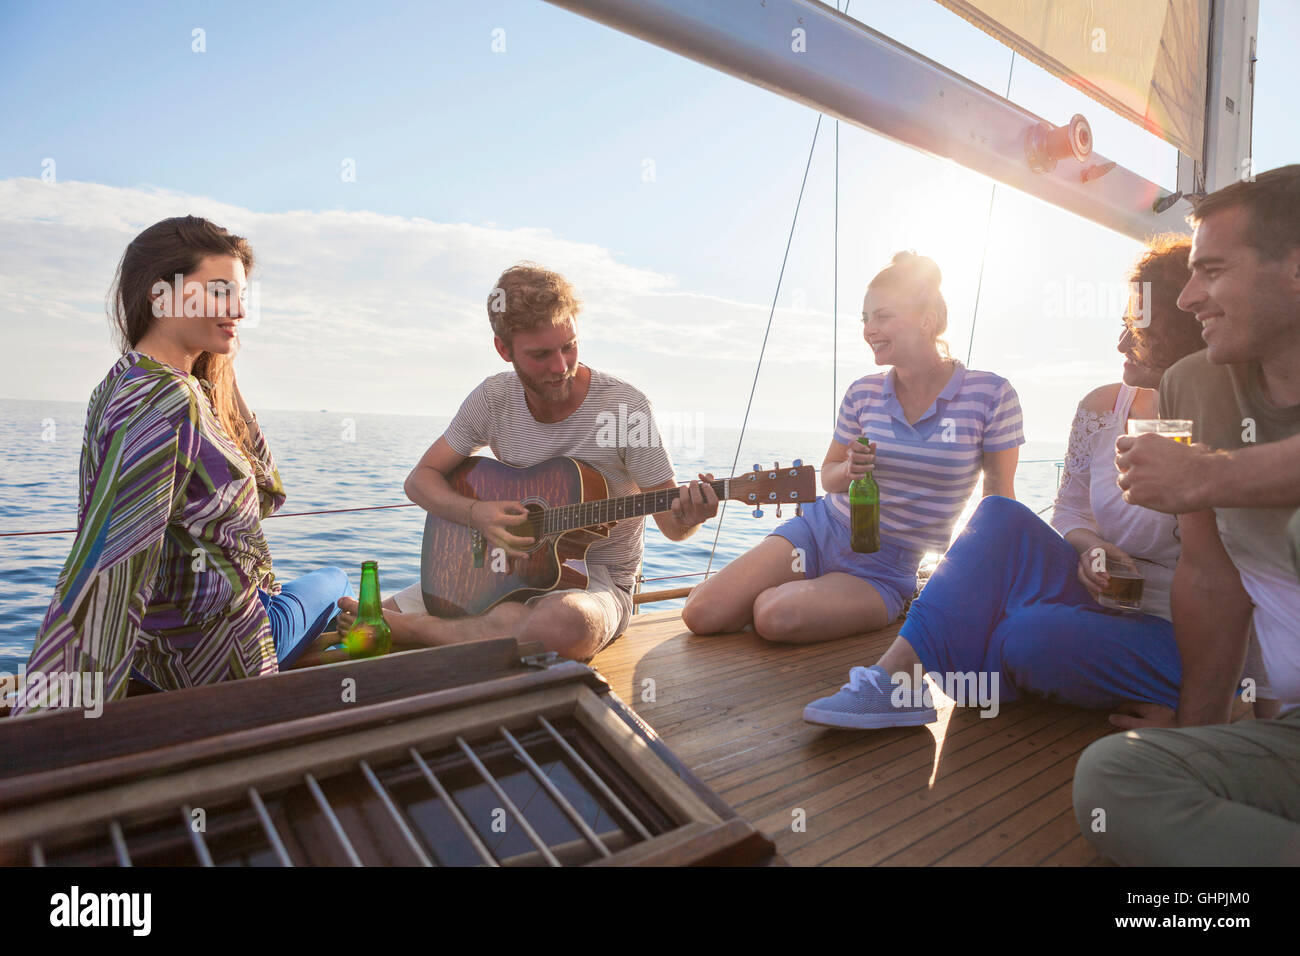 Young man playing guitar on sailboat with friends listening Stock Photo